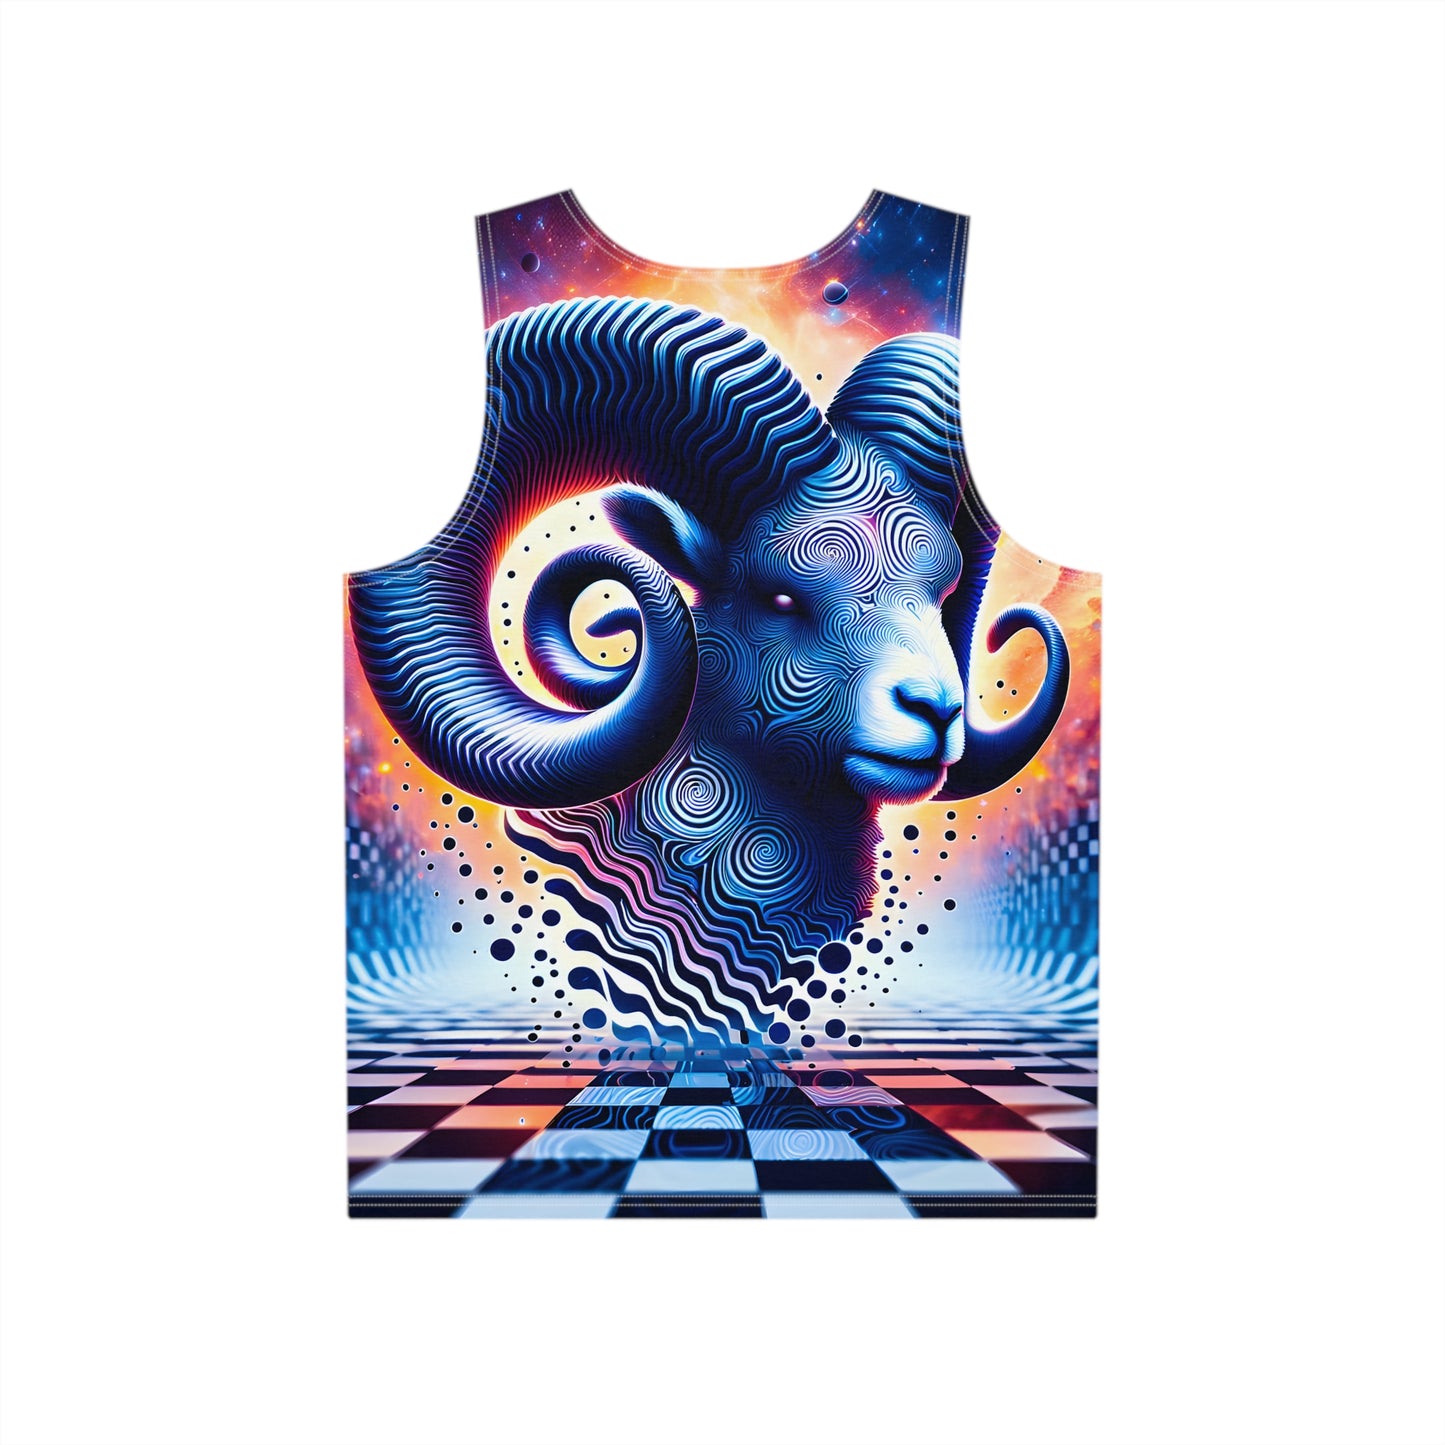 Aries Gift 2024 v1 Psychedelic T-shirt Tank Top by Meta Zen - Festival Rave Street Ware